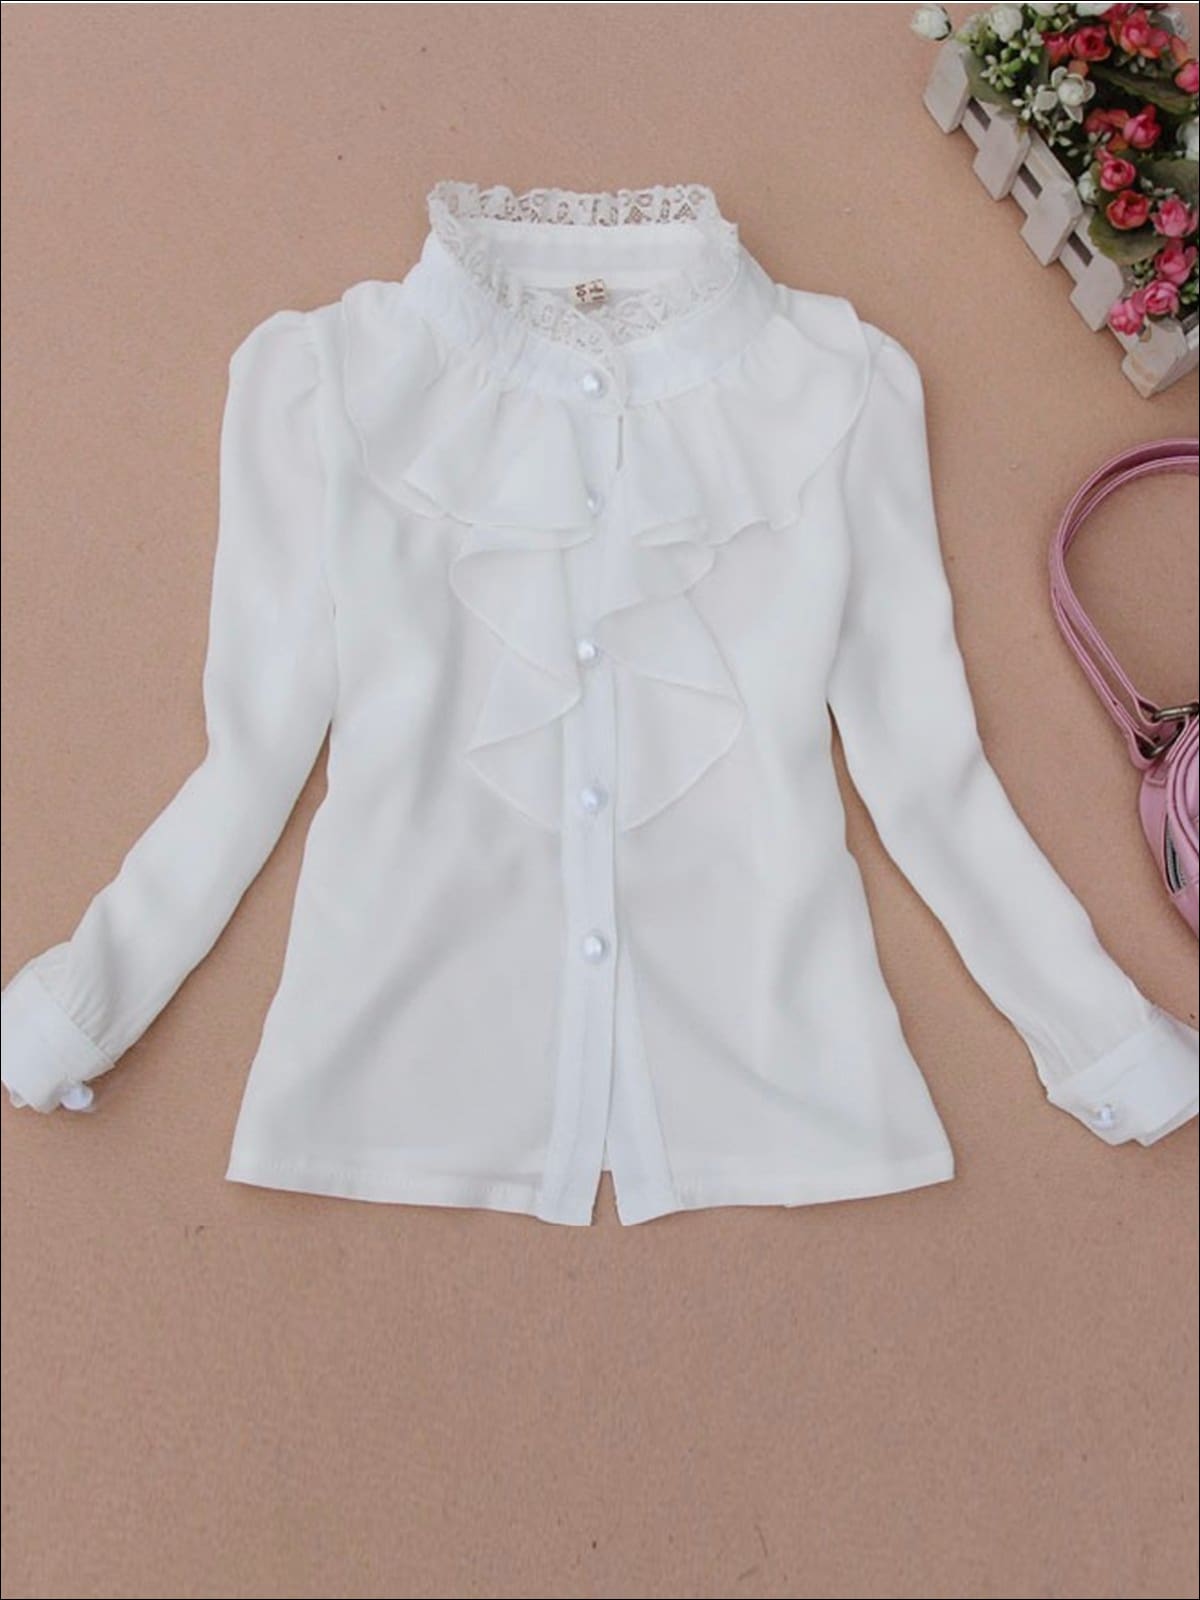 https://cdn.shopify.com/s/files/1/0996/1812/products/girls-preppy-white-lace-trim-ruffle-collar-chiffon-long-sleeve-blouse-2t-20-39-99-40-59-10y12y-2t3t-4t5y-fall-top-mia-belle-overseas-fulfillment-baby_131.jpg